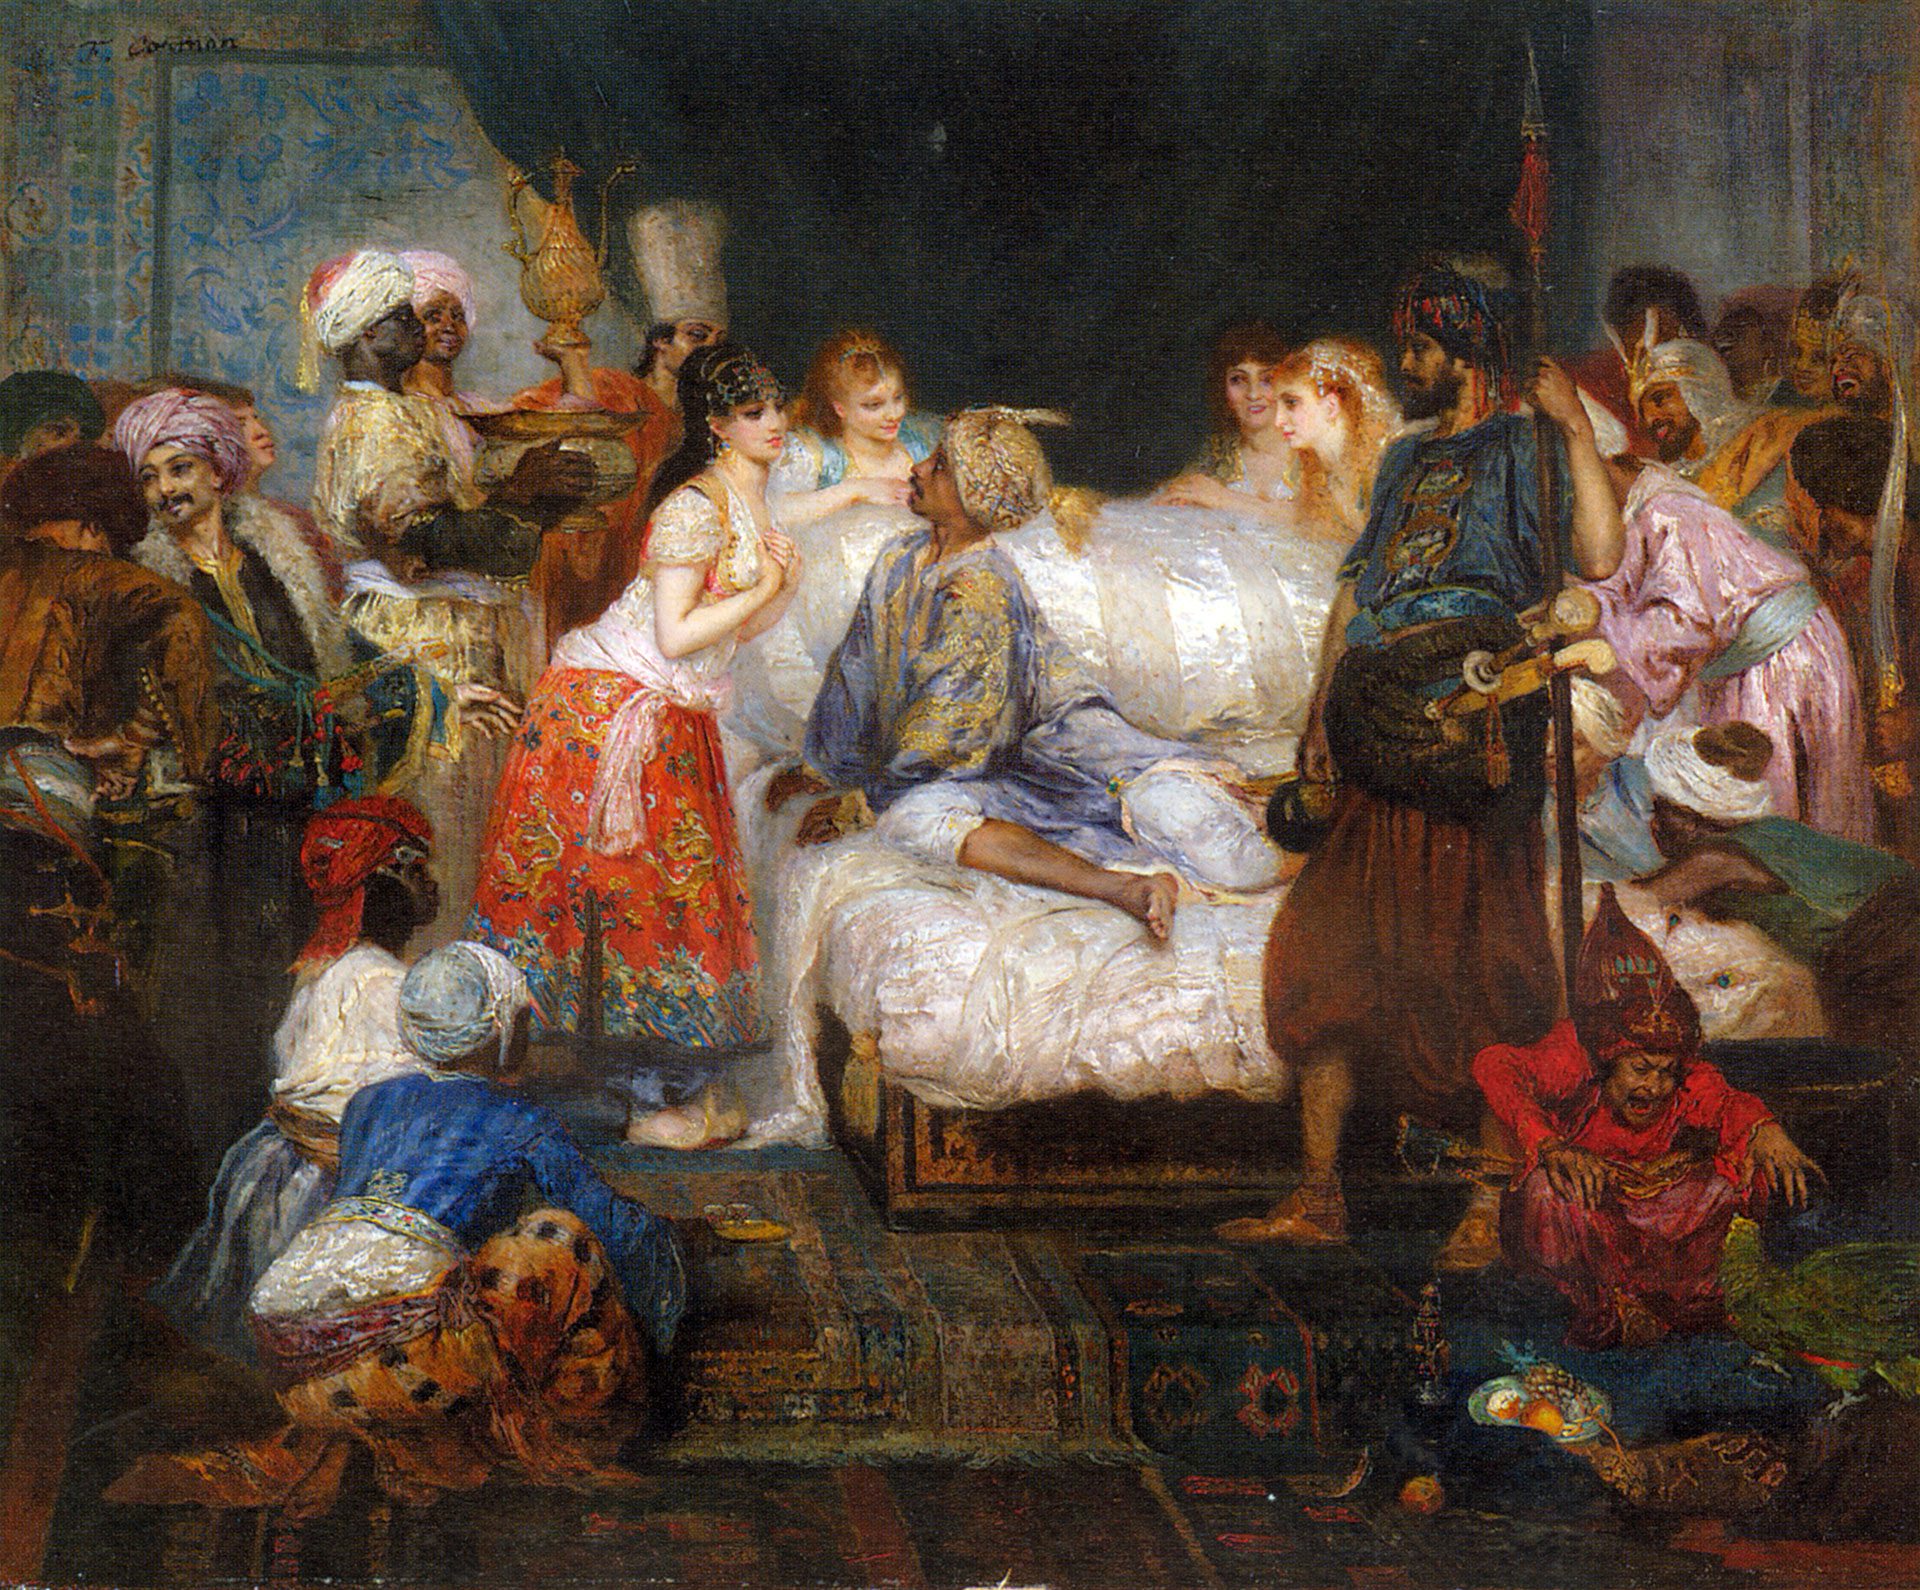 Scene from the Harem by Fernand Cormon, c. 1877